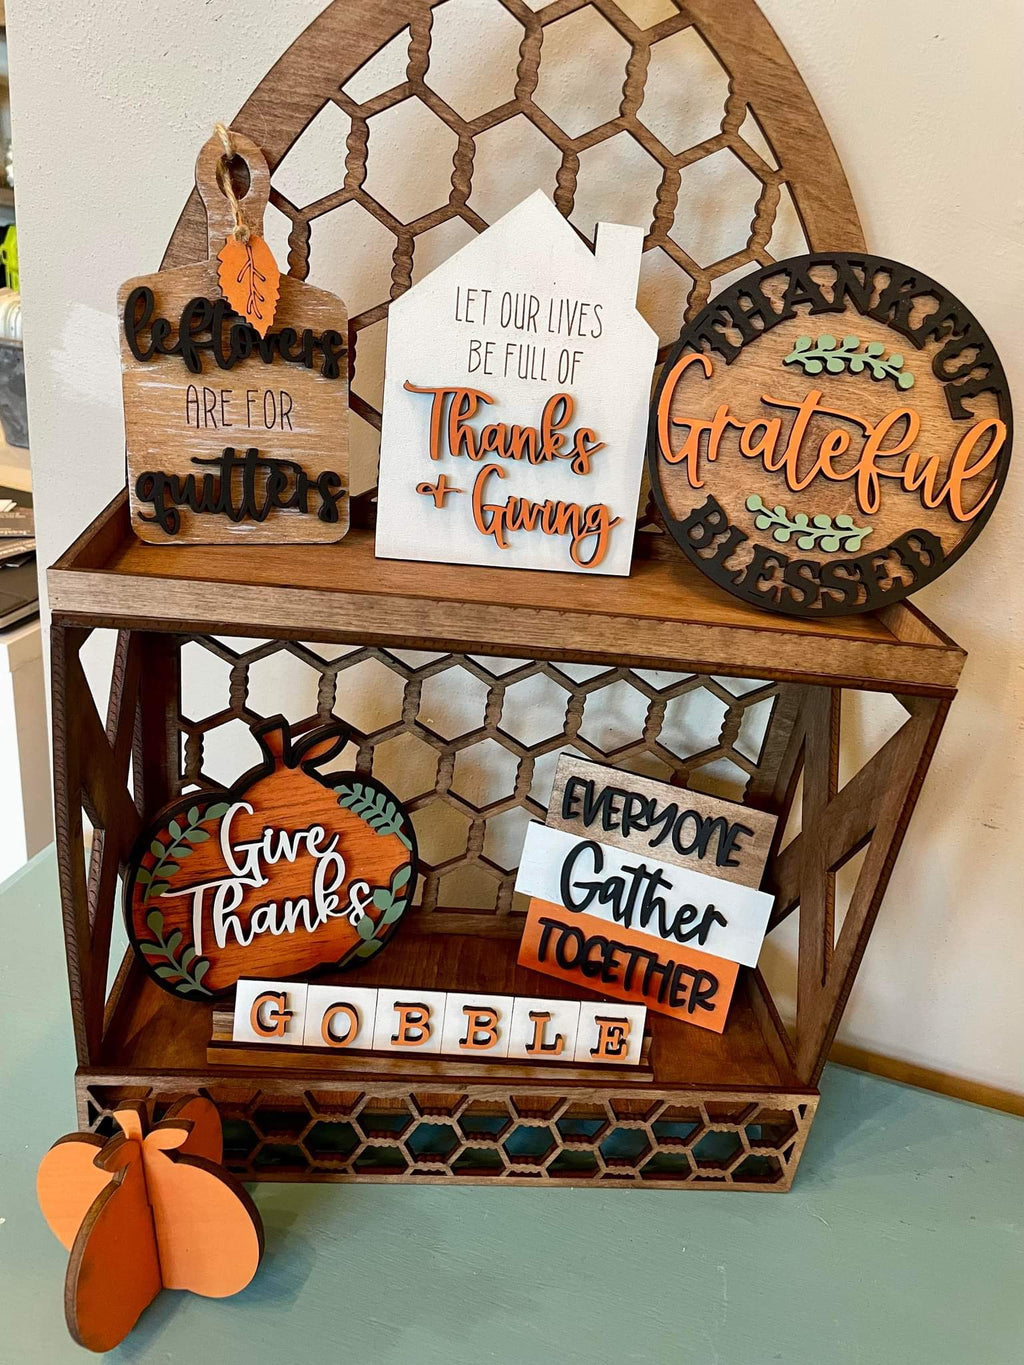 3D Tiered Tray Decor - Thanksgiving - everyone gather together